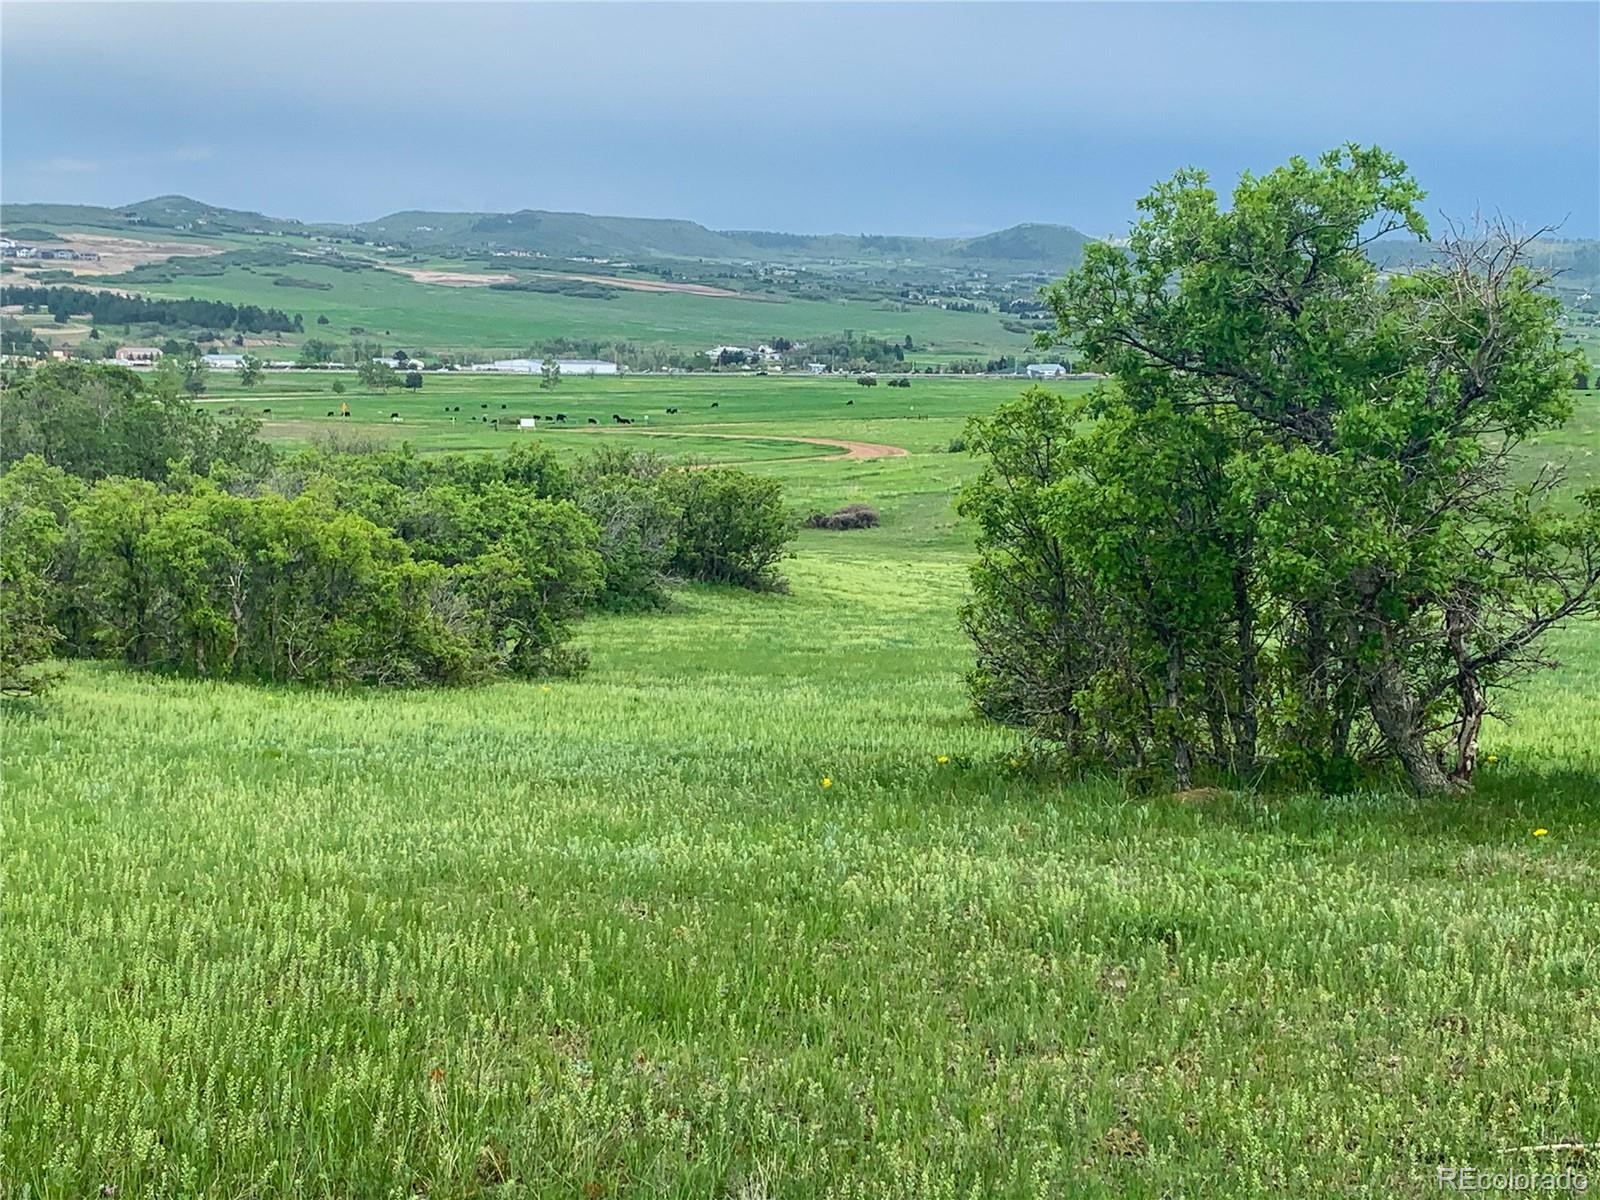 a view of a green field with lots of bushes